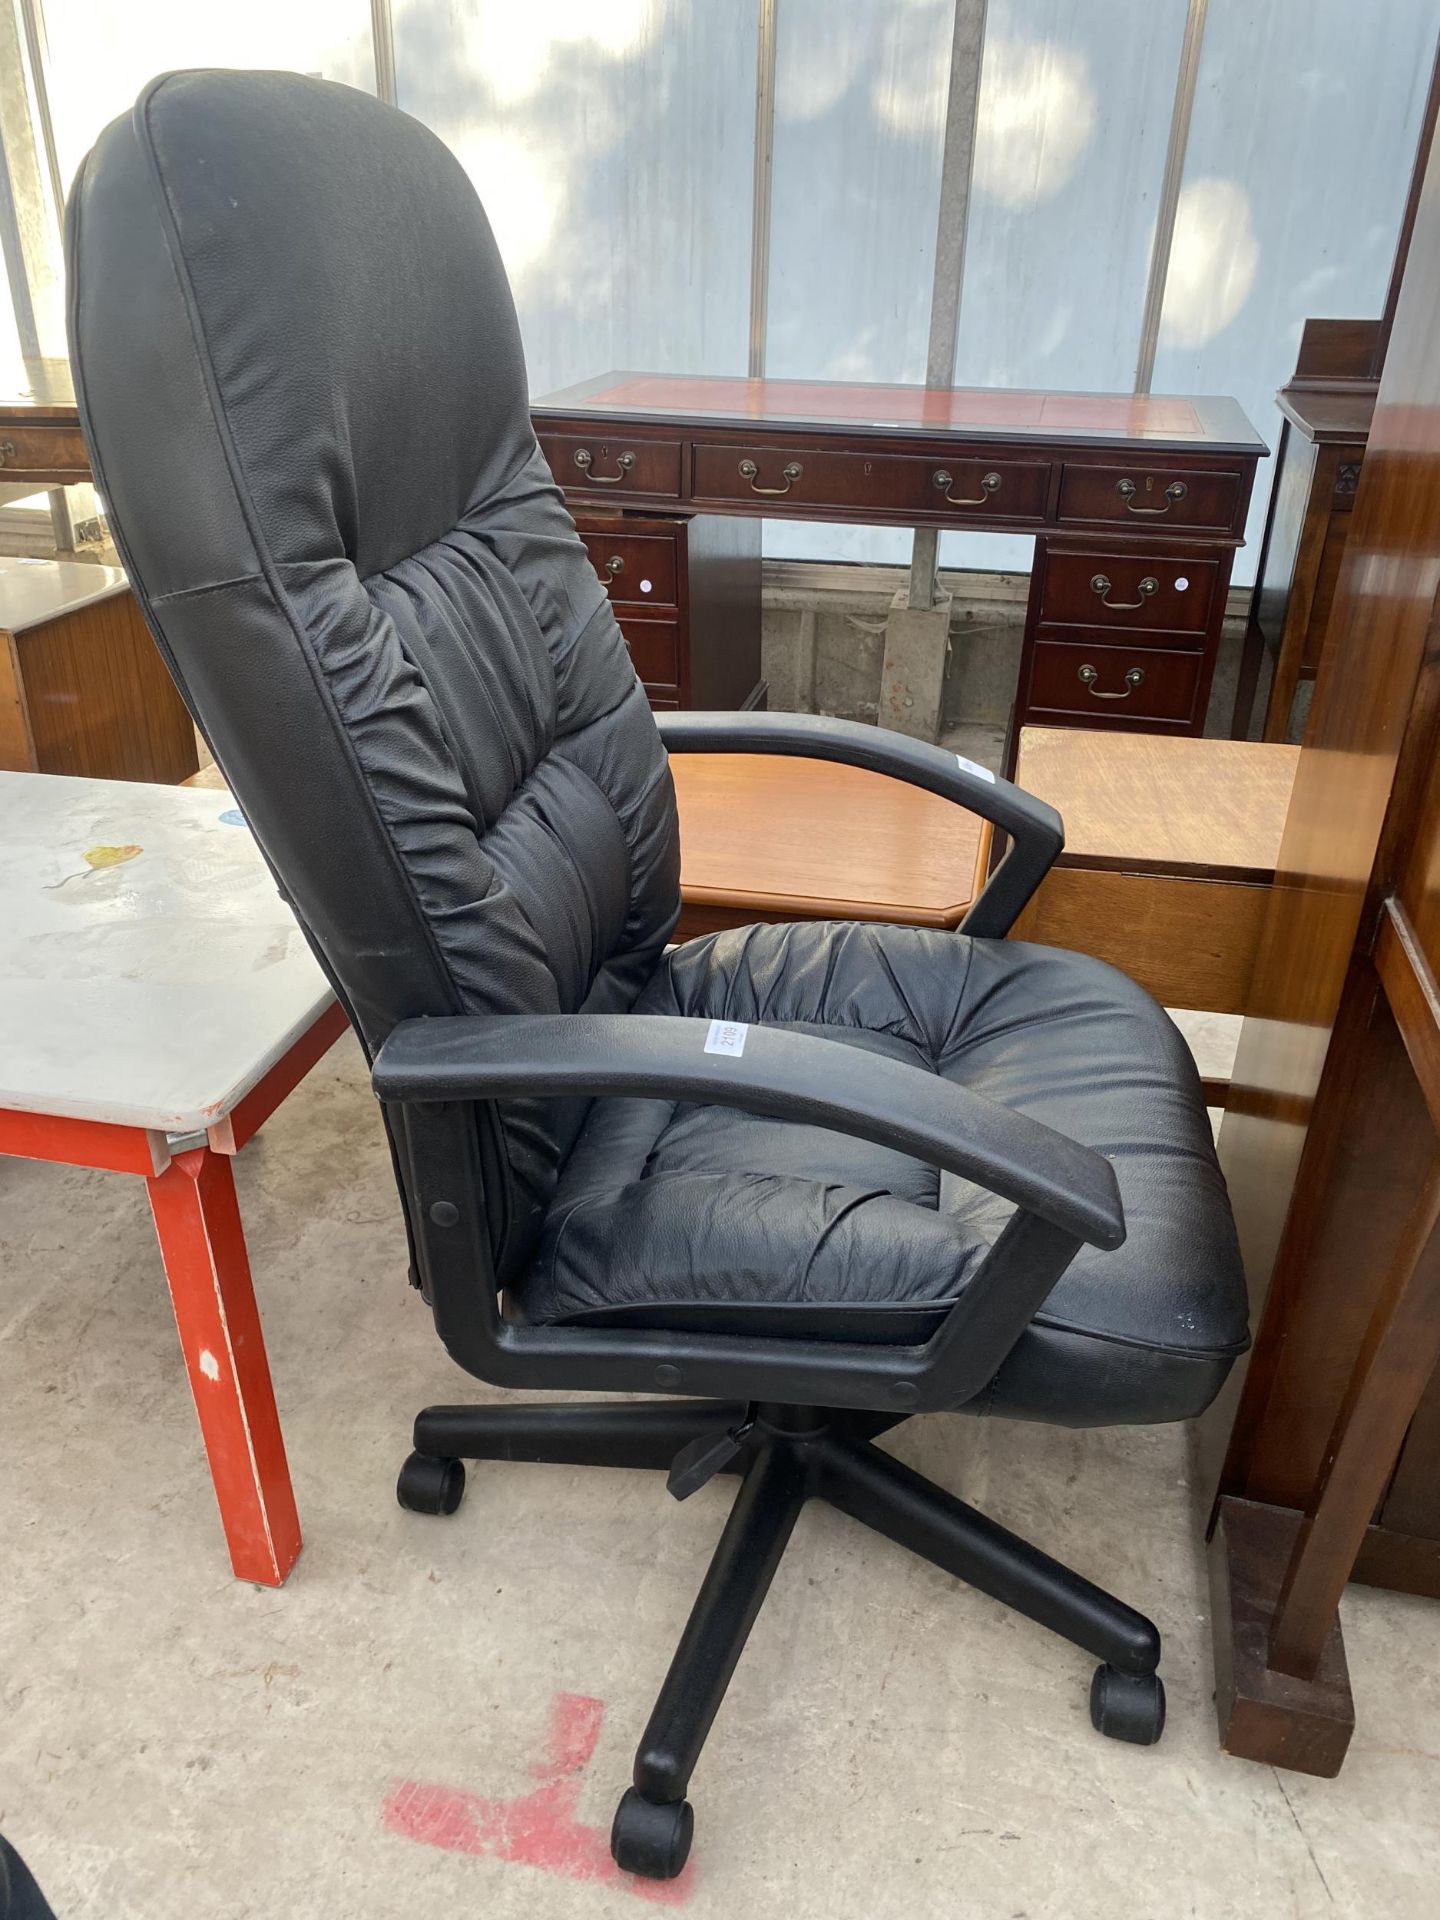 A MODERN BLACK OFFICE SWIVEL ARM CHAIR - Image 2 of 3